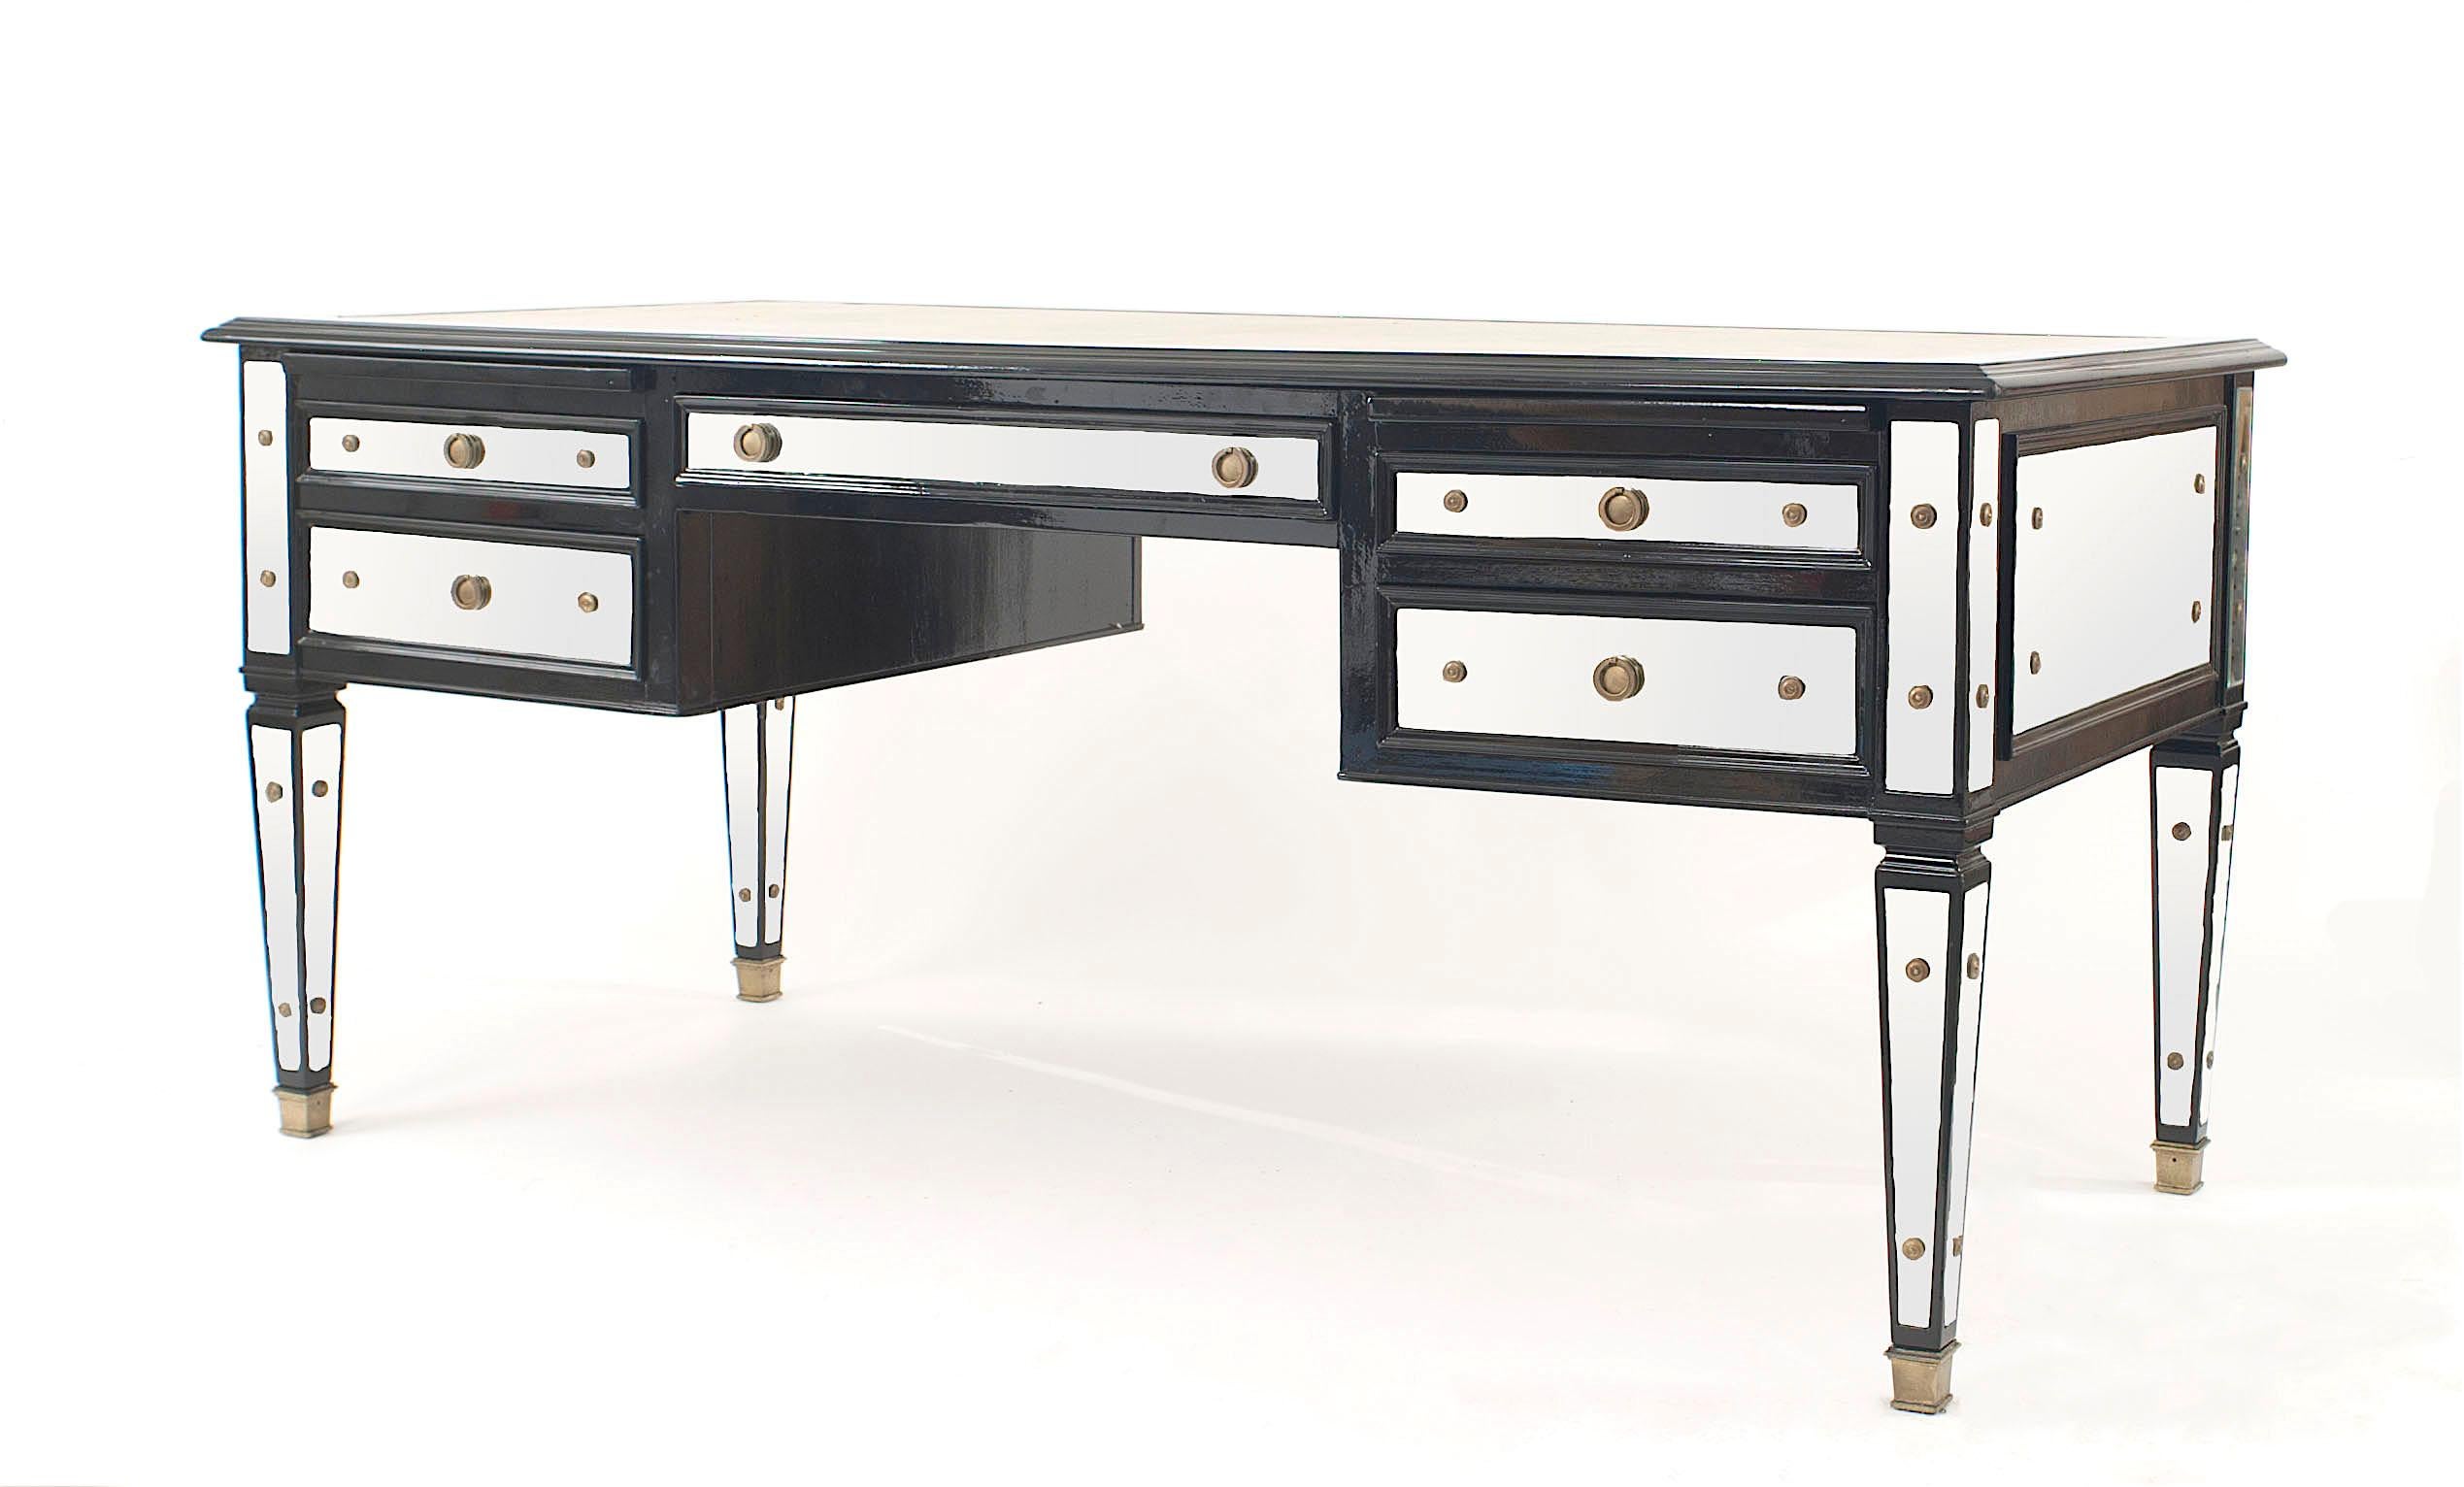 French mid-century (1940s) ebonized and mirrored desk with five drawers and an off-white leather writing surface (Maison Jansen).

Maison Jansen was a Paris-based interior decoration office founded in 1880 by Dutch-born Jean-Henri Jansen. Jansen